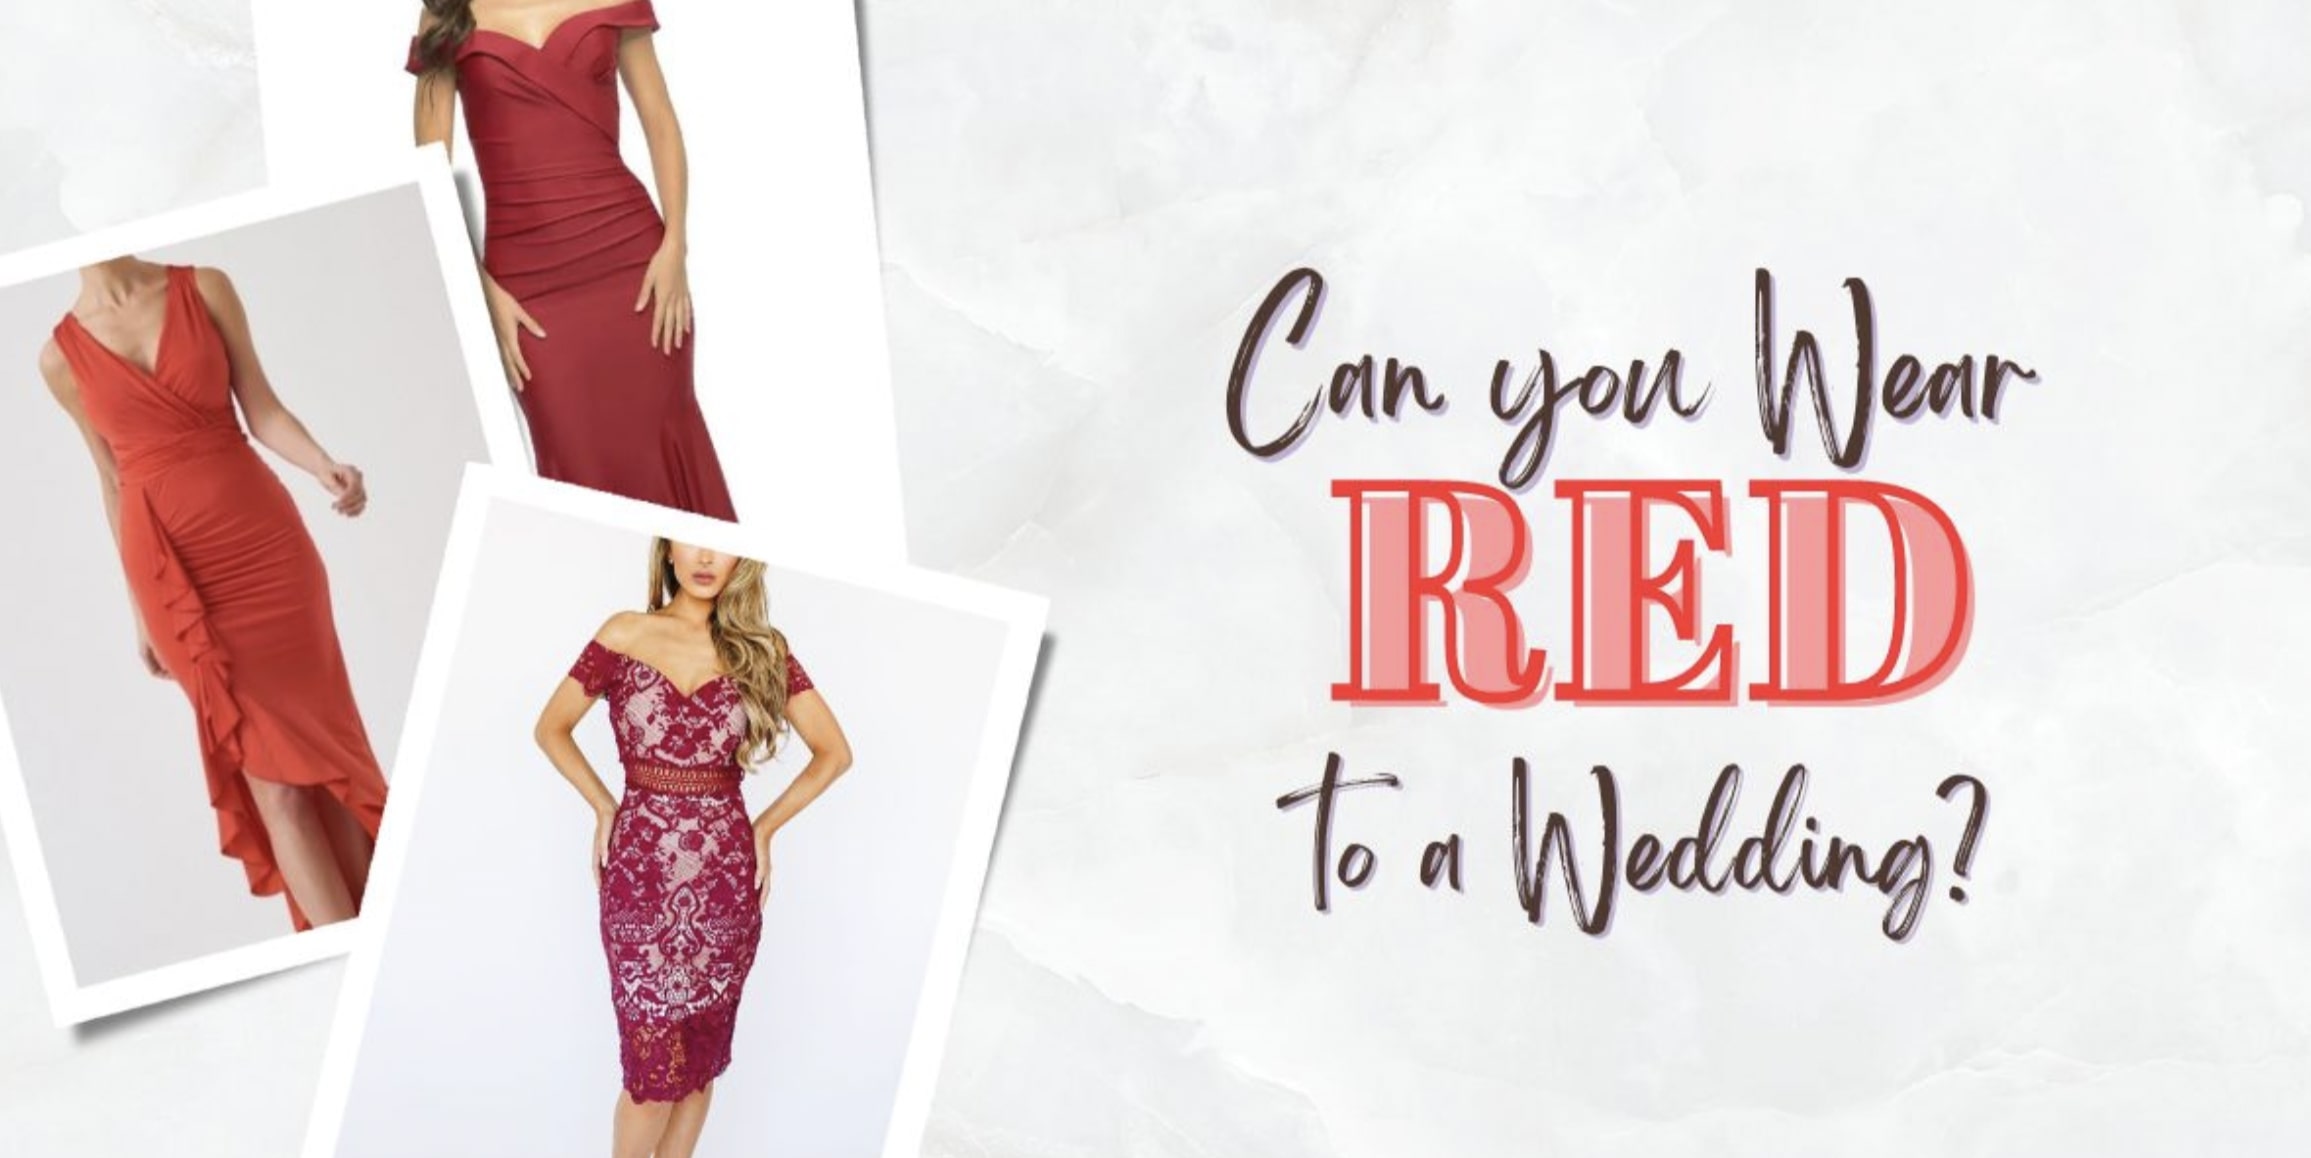 Wearing Red to a Wedding: The Dos and Don’ts